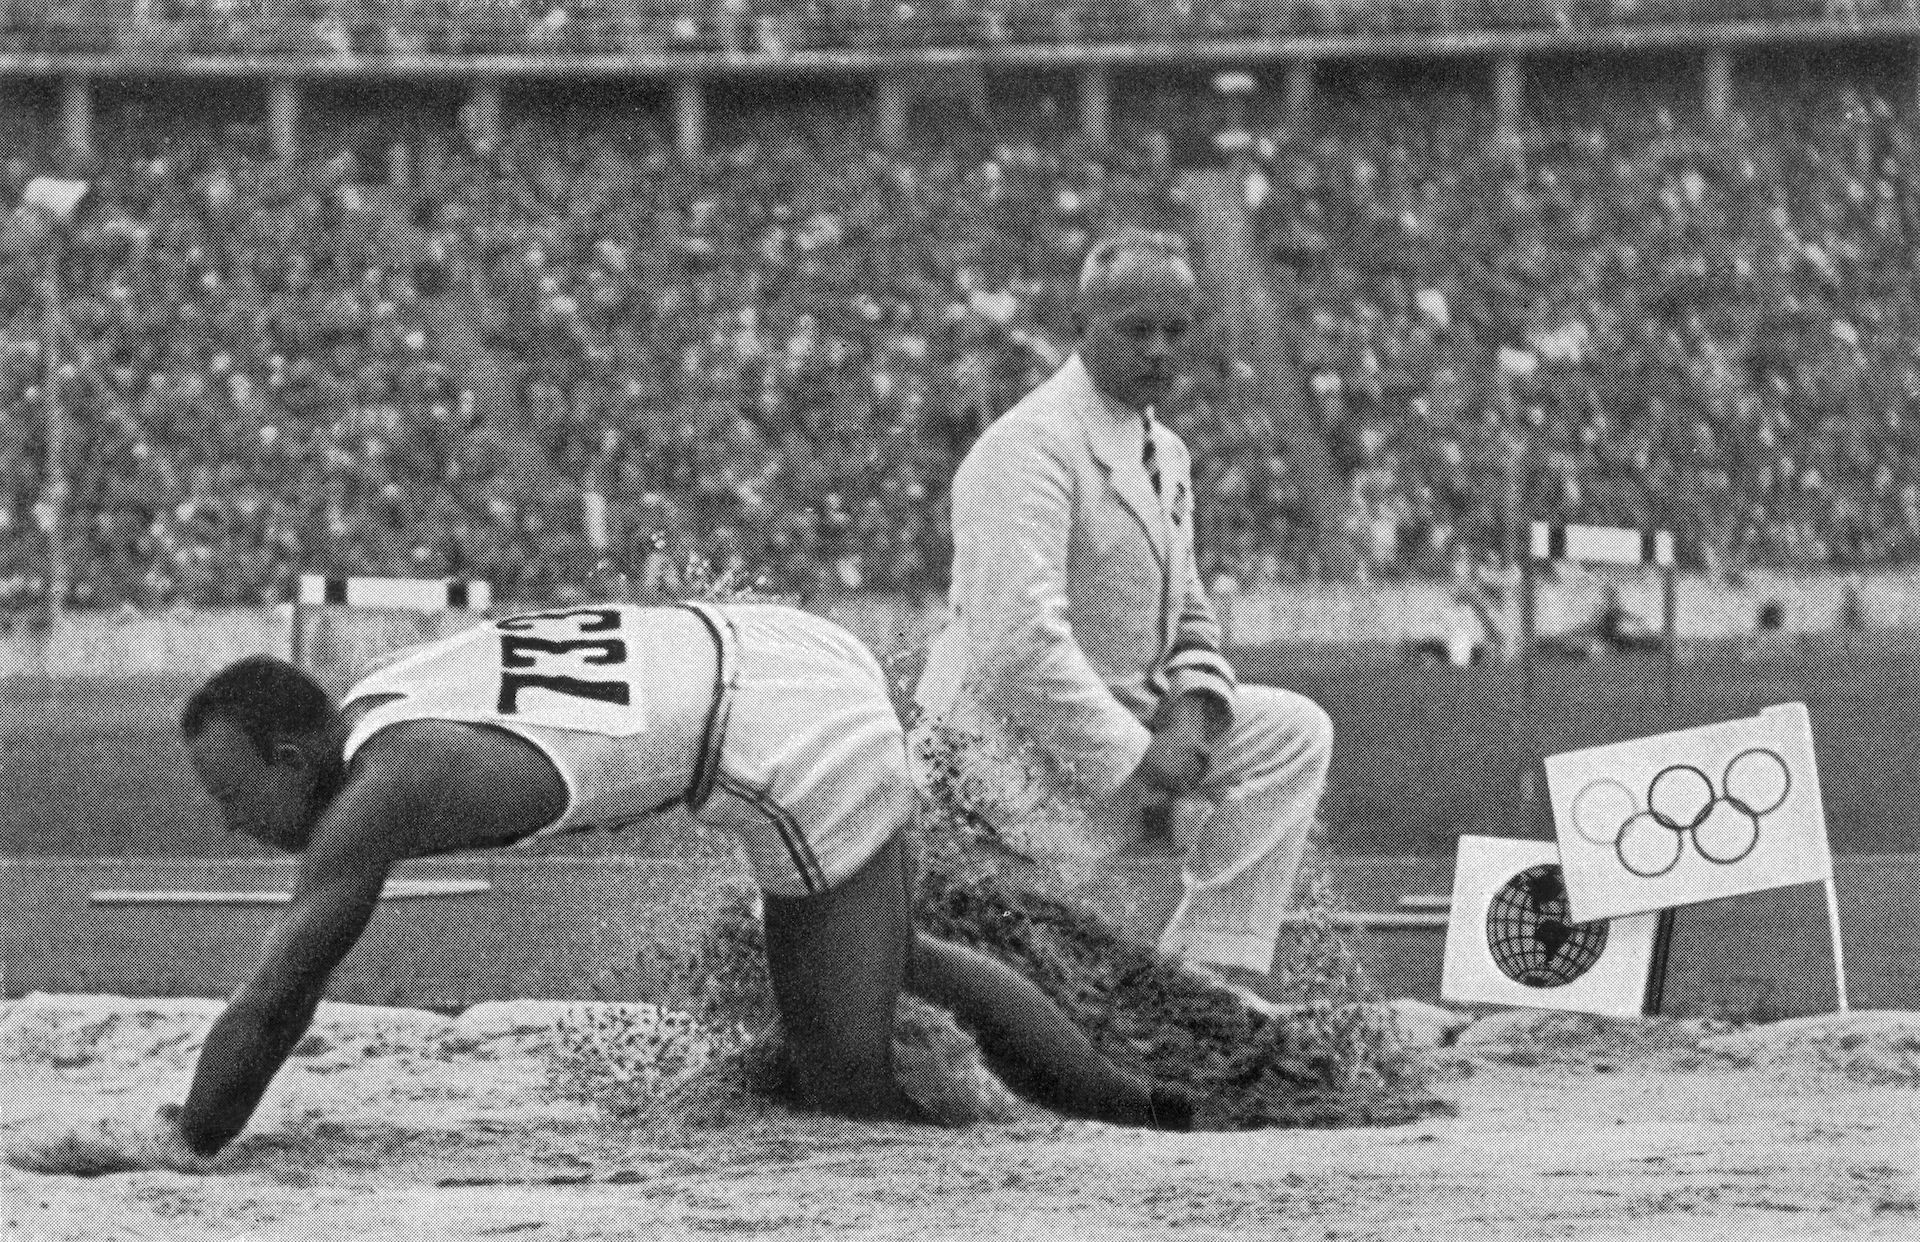 Owens competing at the long jump at the 1936 Berlin Olympics. GETTY IMAGES